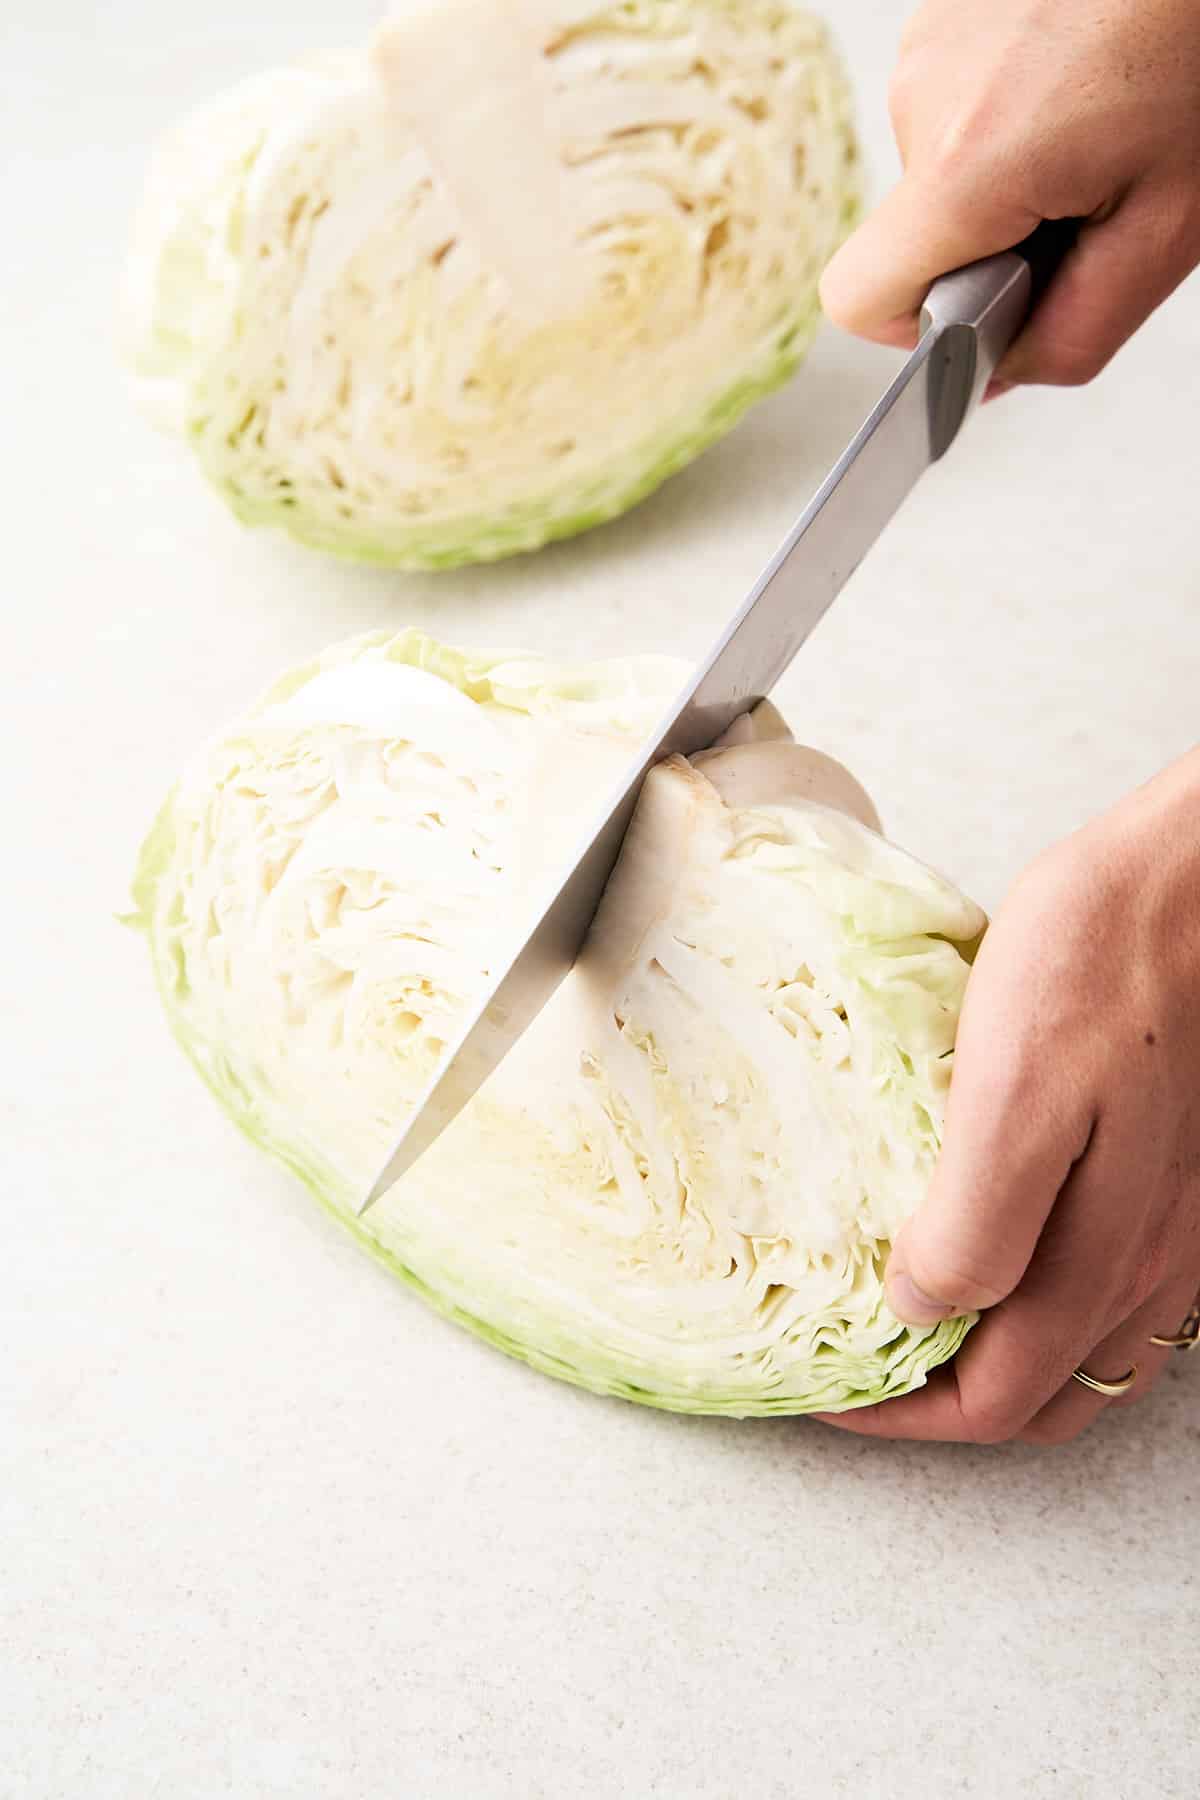 Cutting cabbage into quarters.